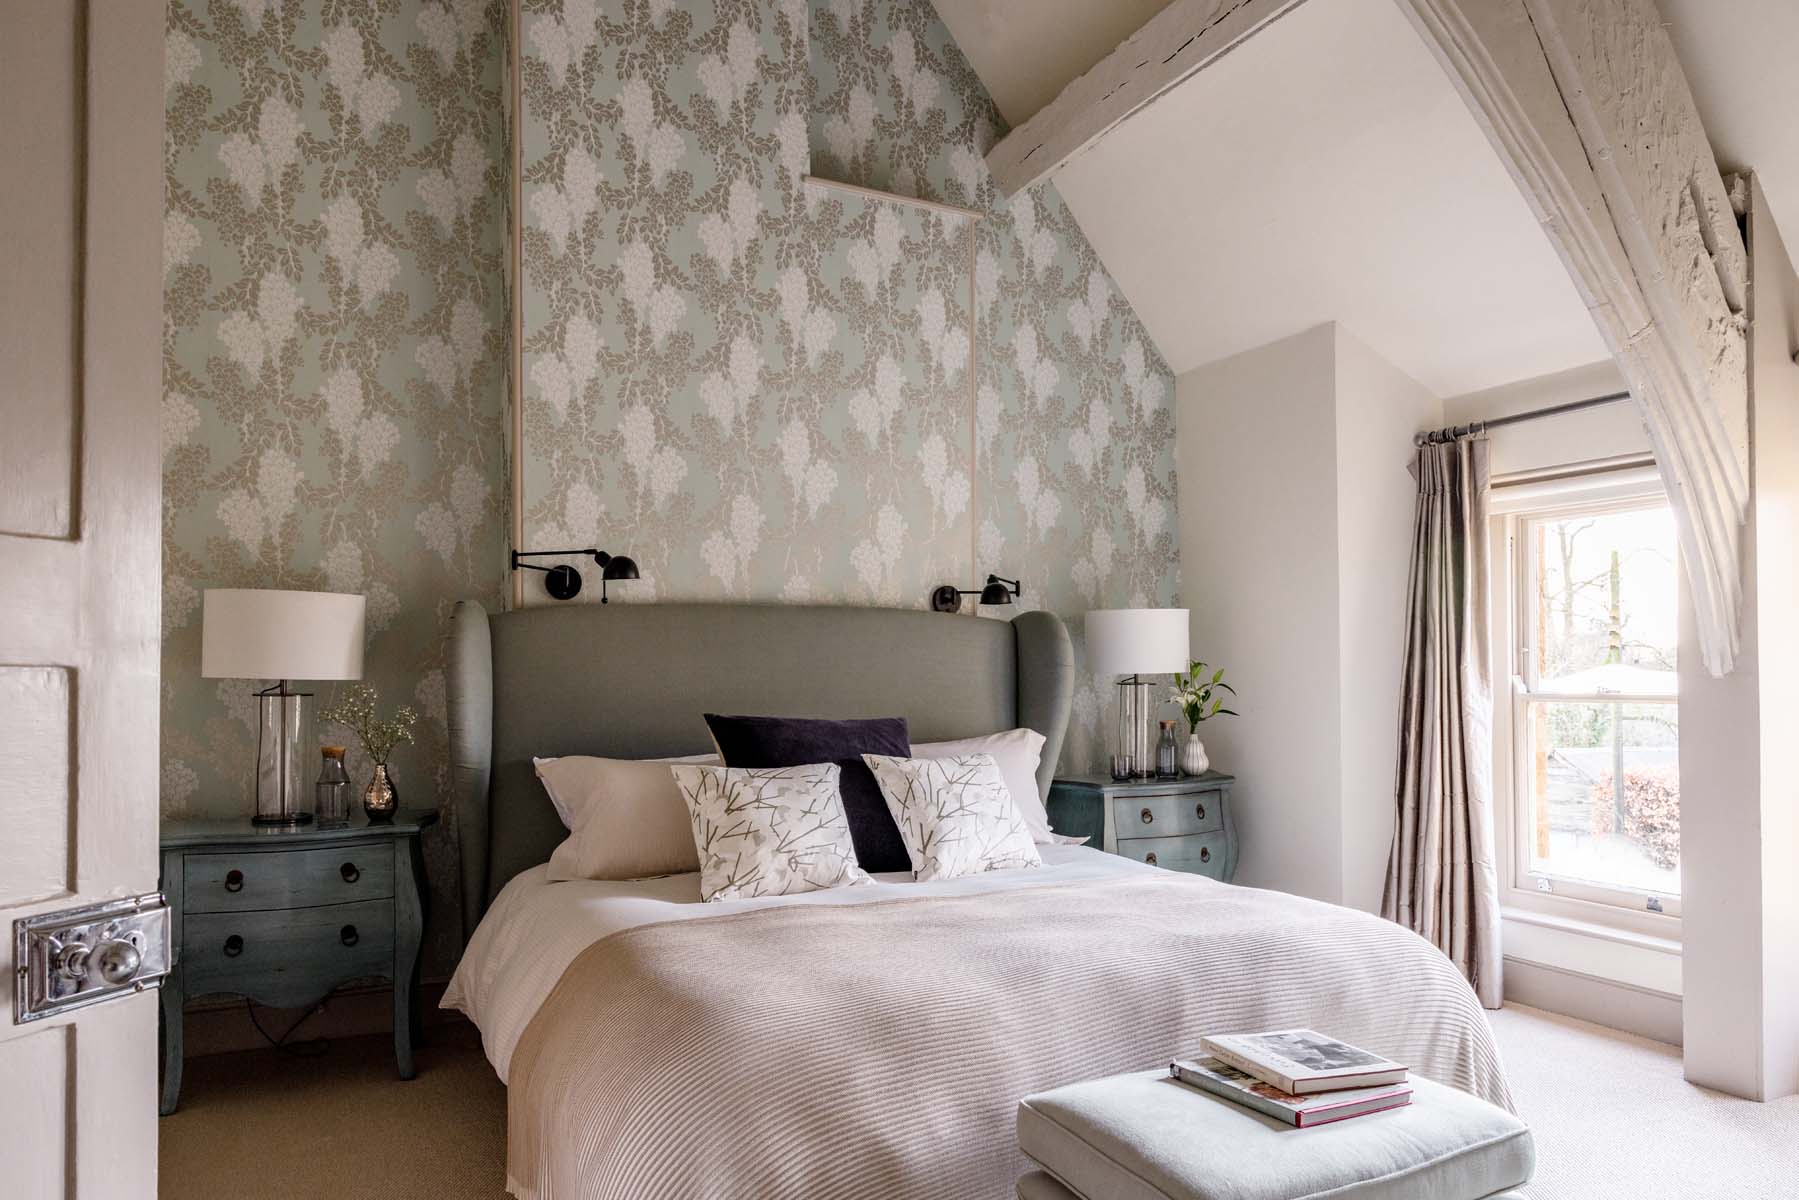 Bedroom with high ceilings and patterned wallpaper